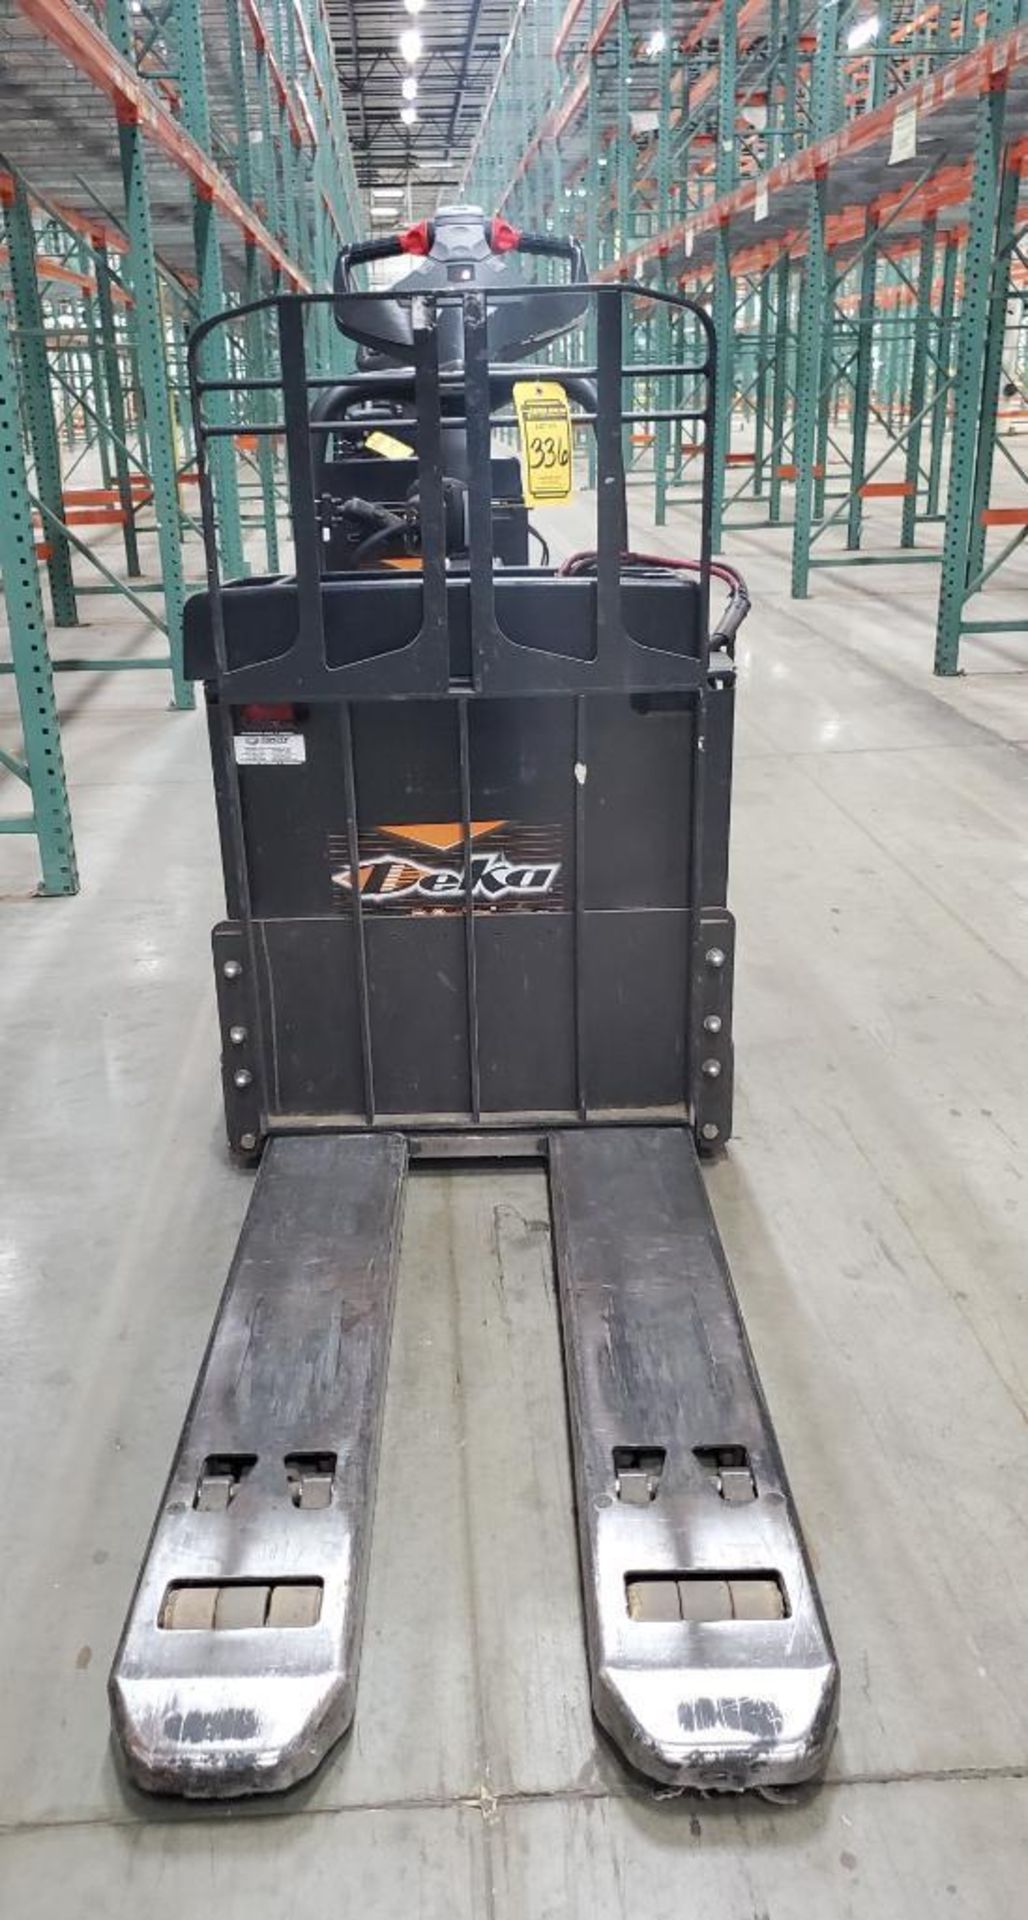 2013 RAYMOND 6,000 LB. CAPACITY ELECTRIC PALLET TRUCK; MODEL 8410, S/N 841-13-17109, WITH IWAREHOUSE - Image 2 of 8